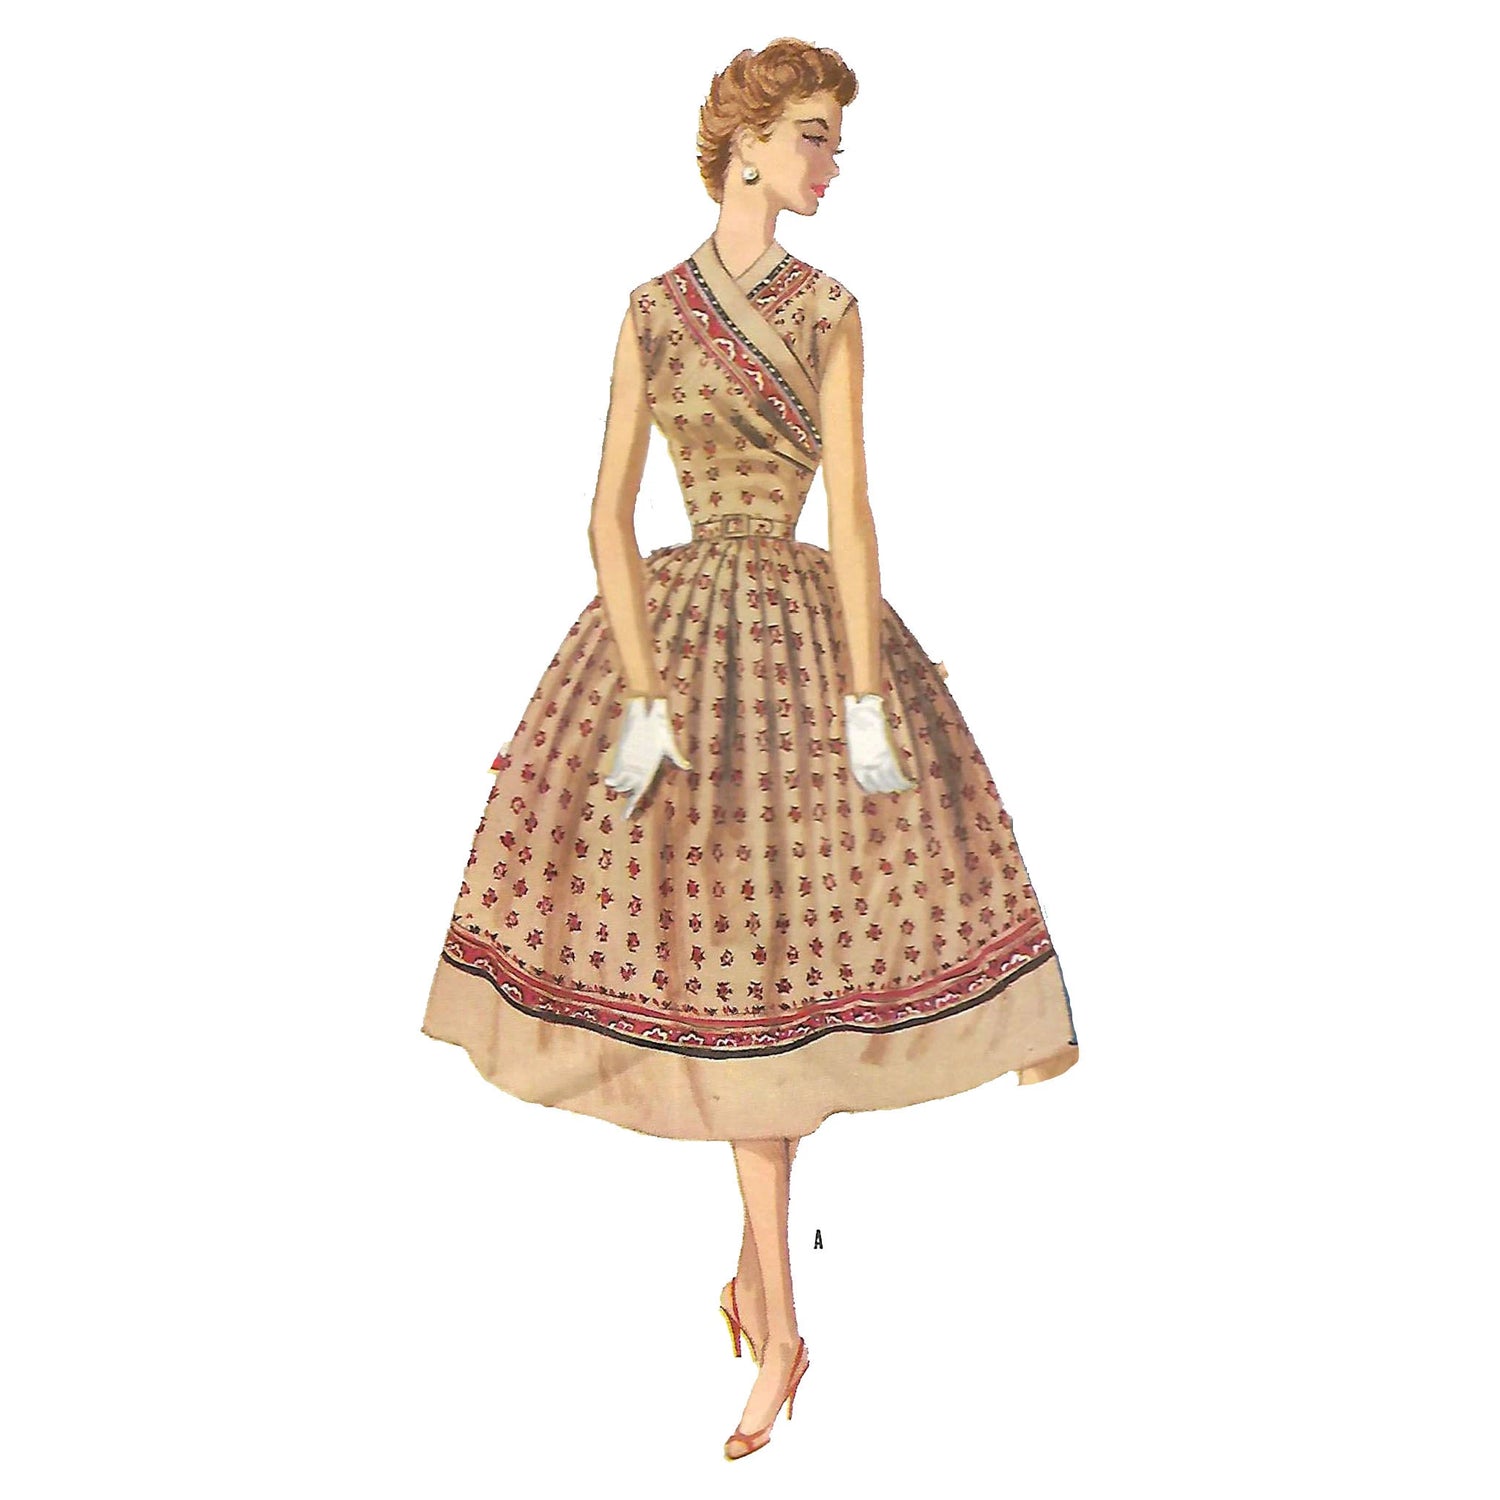 Model wearing 1950s dress made from McCall’s 3472 pattern